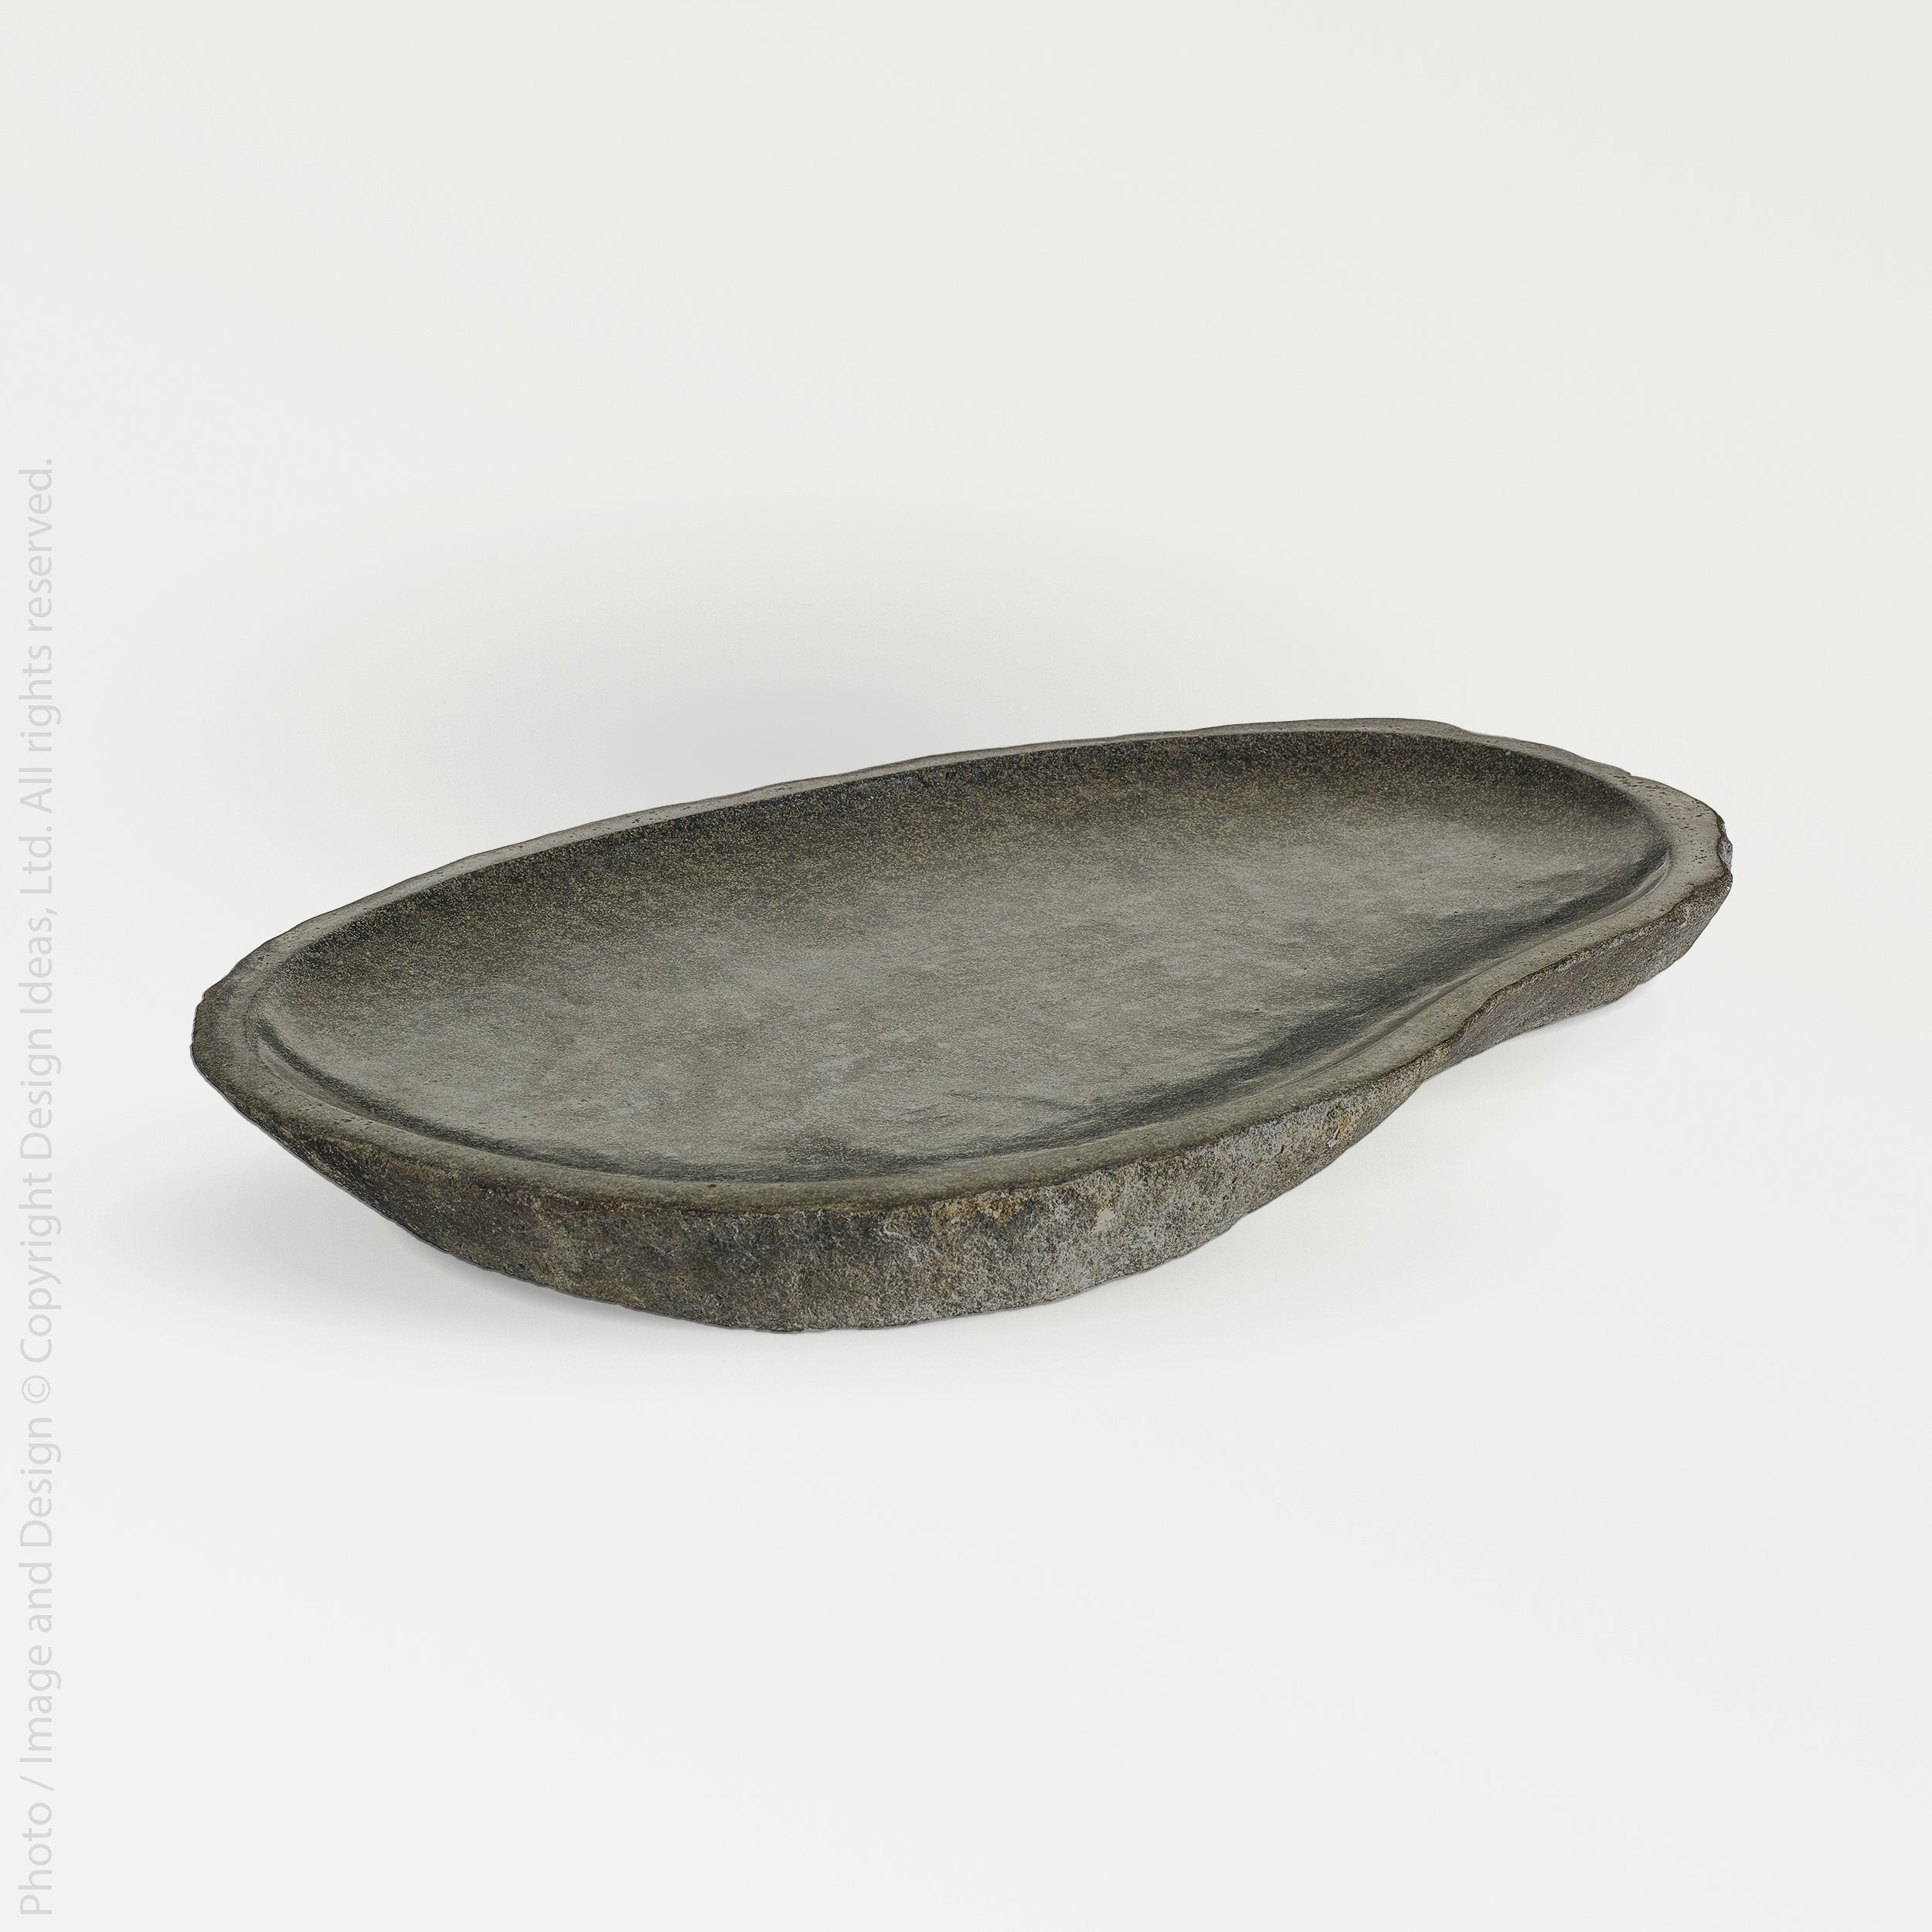 Riverstone Platter (Large) - Black Color | Image 1 | From the Riverstone Collection | Masterfully constructed with natural riverstone for long lasting use | This platter is sustainably sourced | Available in black color | texxture home